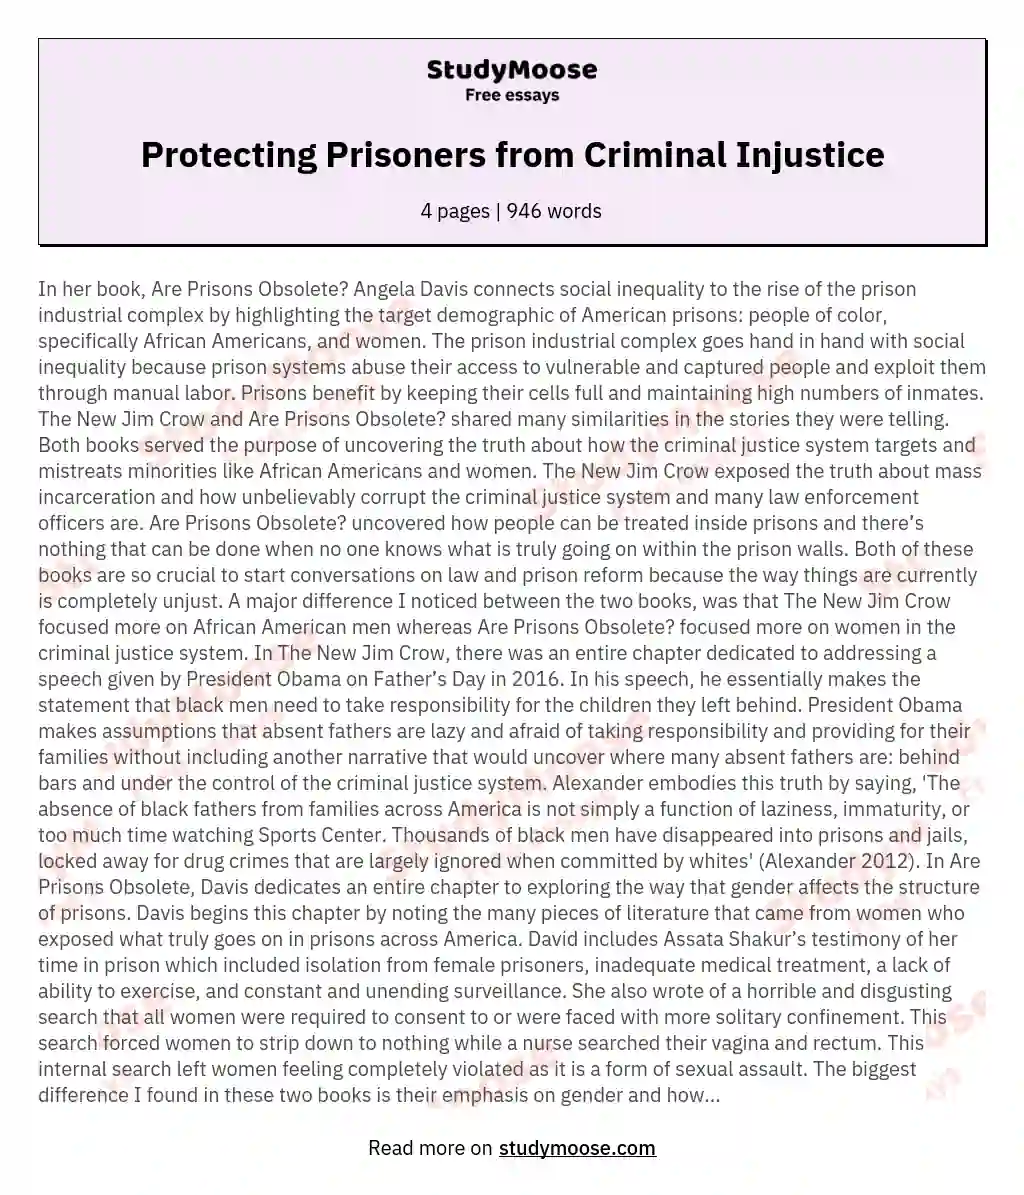 Protecting Prisoners from Criminal Injustice essay